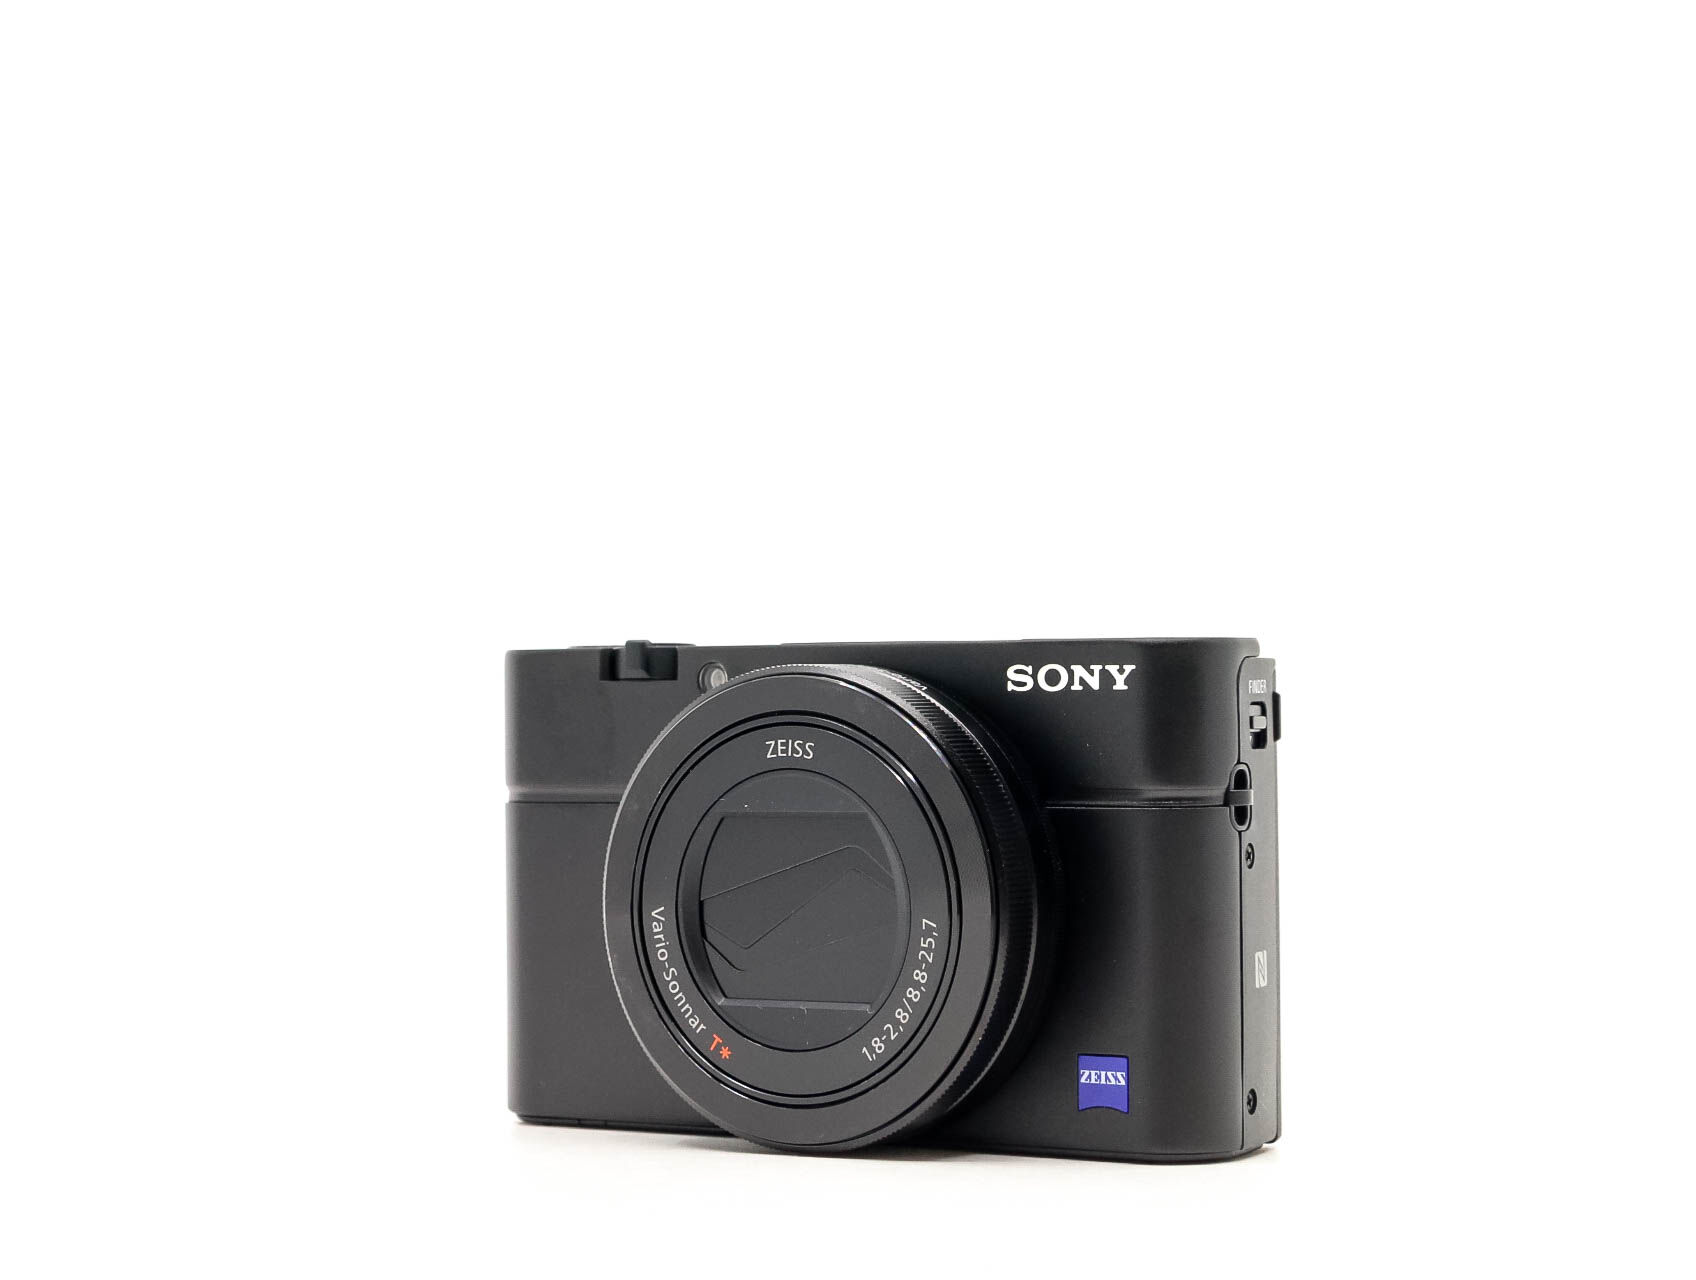 sony cyber-shot rx100 mark iii (condition: like new)